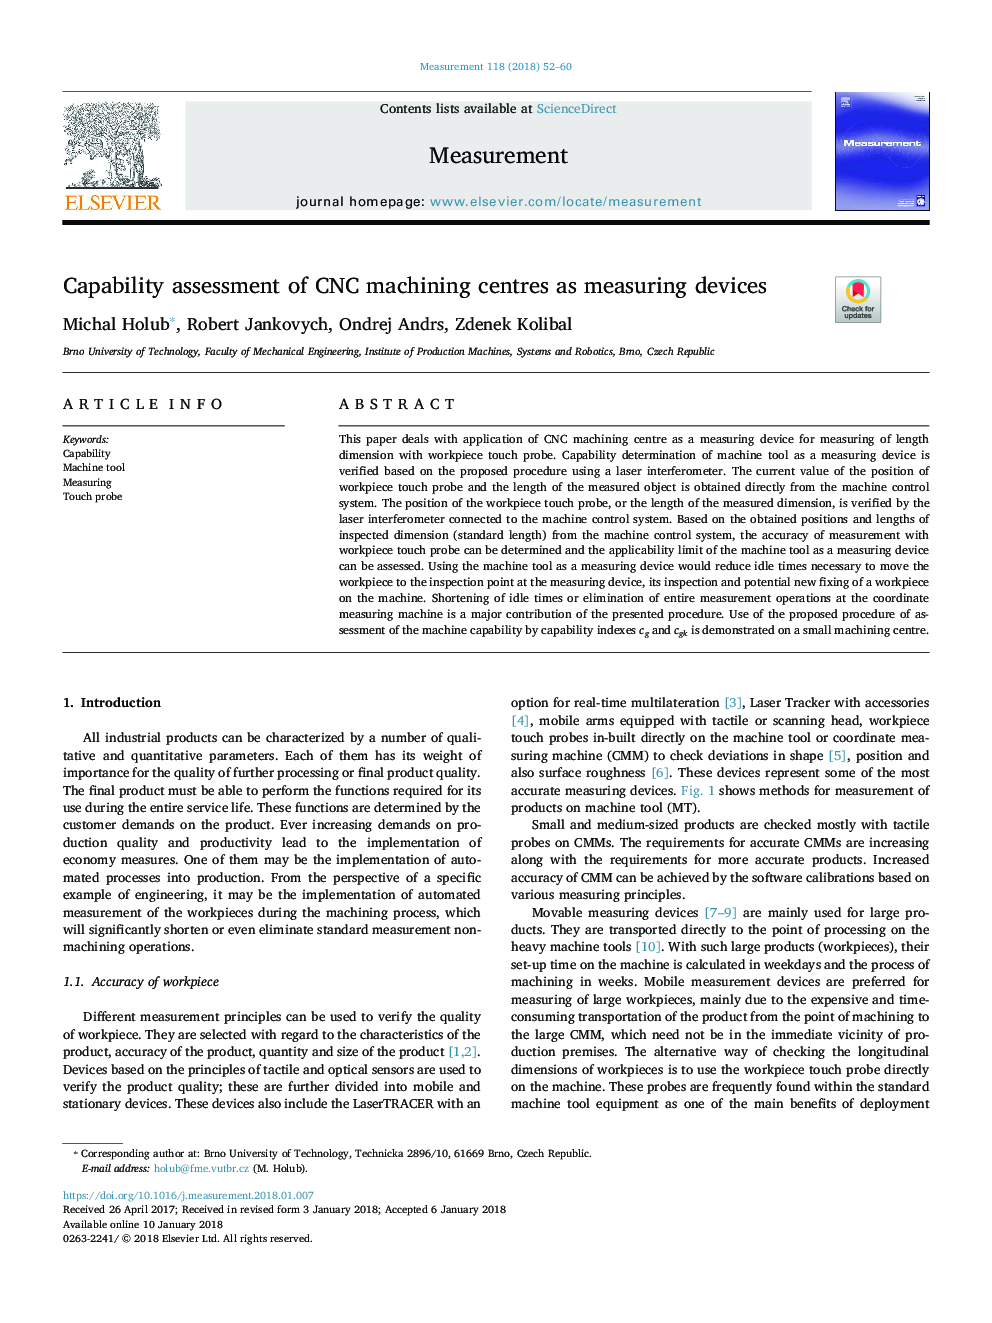 Capability assessment of CNC machining centres as measuring devices